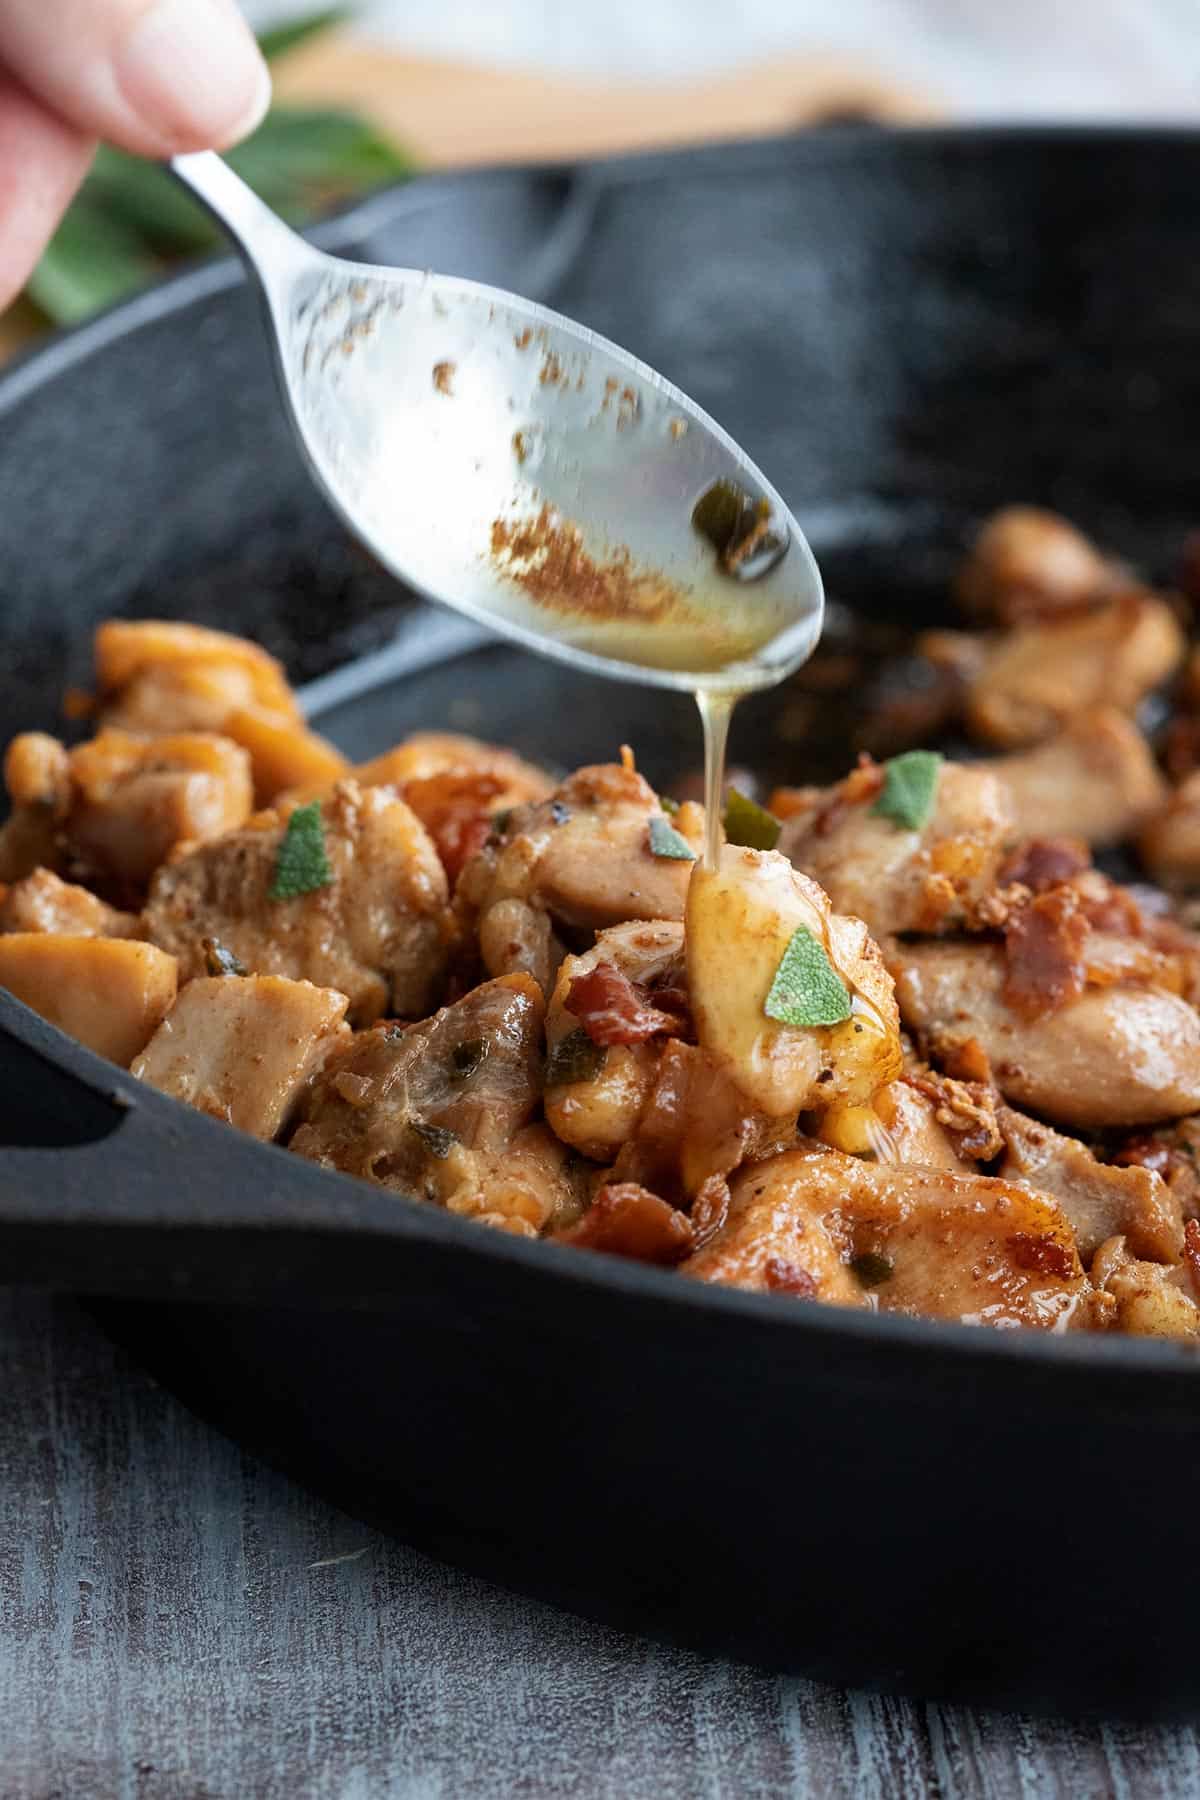 A spoon pouring brown butter over chicken in a cast iron skillet.